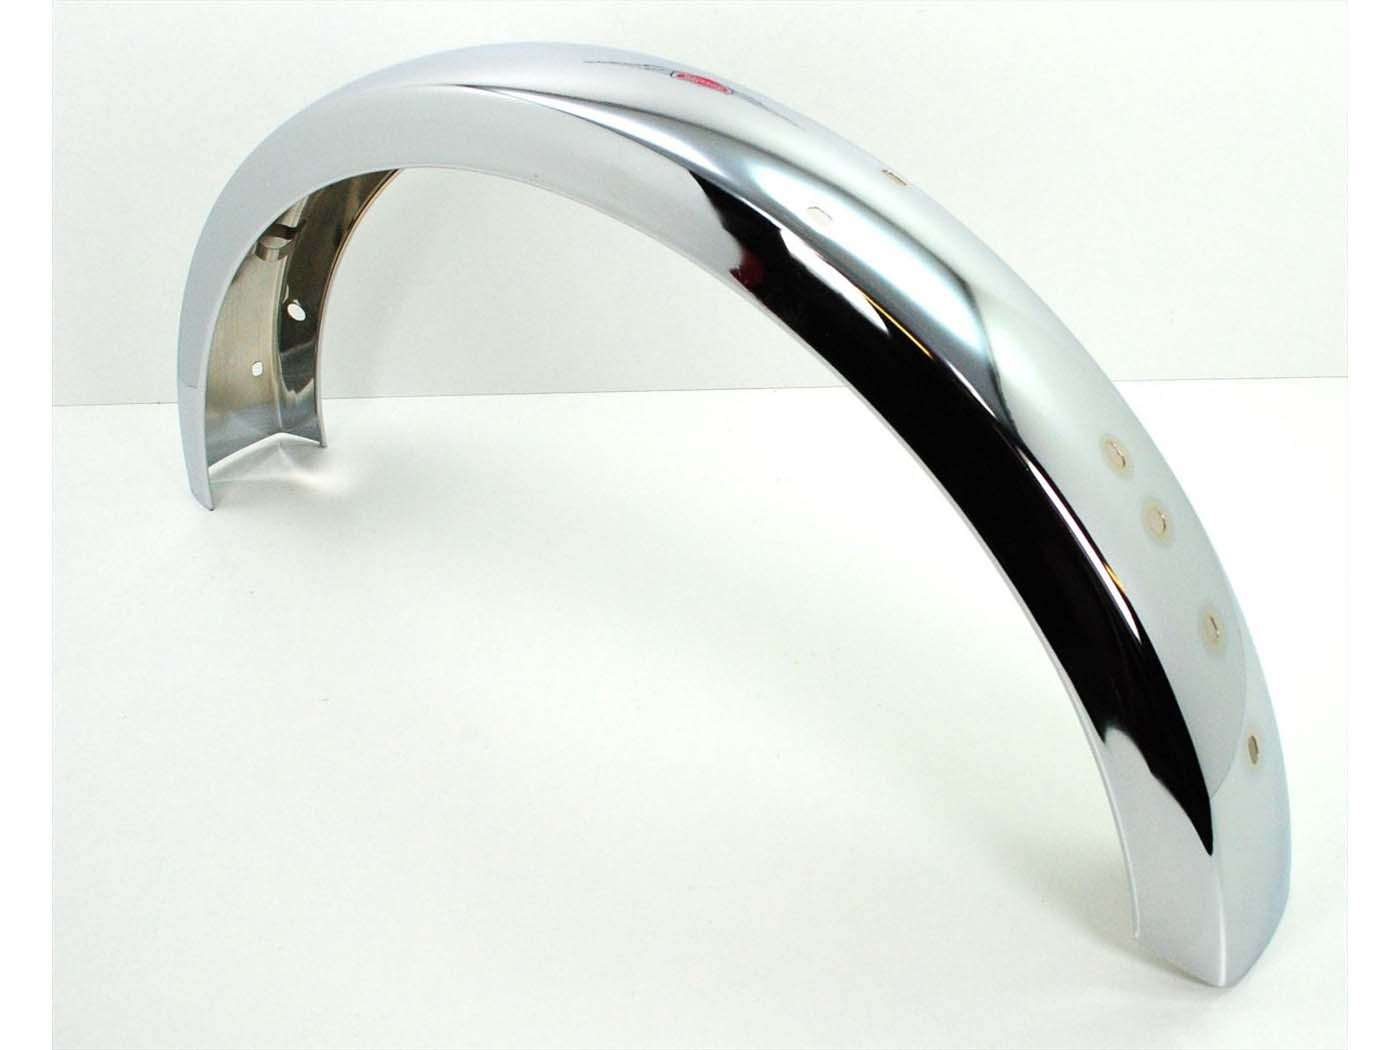 Rear Mudguard For Peugeot 103 MVL SP Moped, Moped